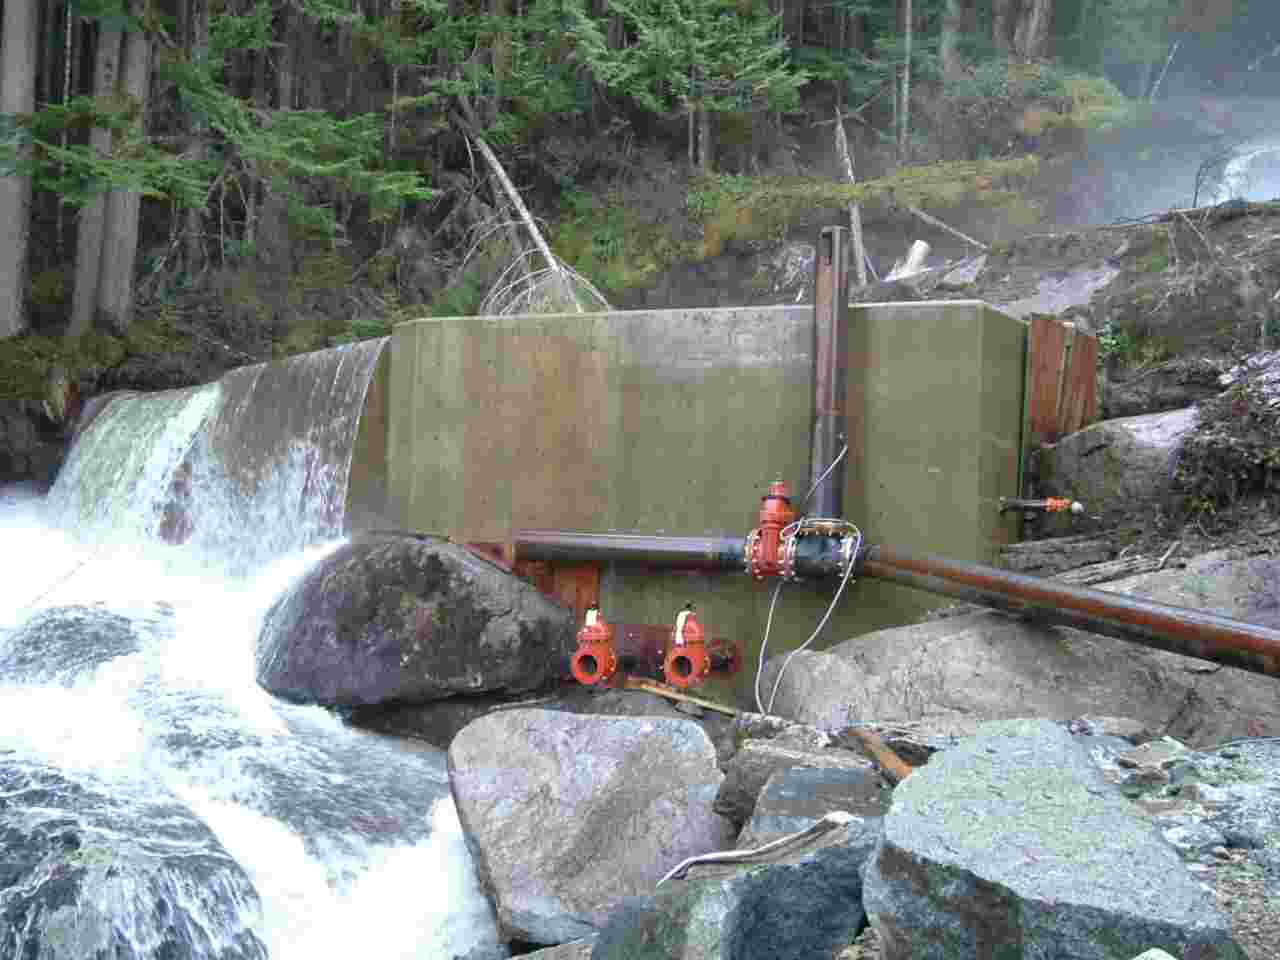 McCannel creek weir, recently completed.